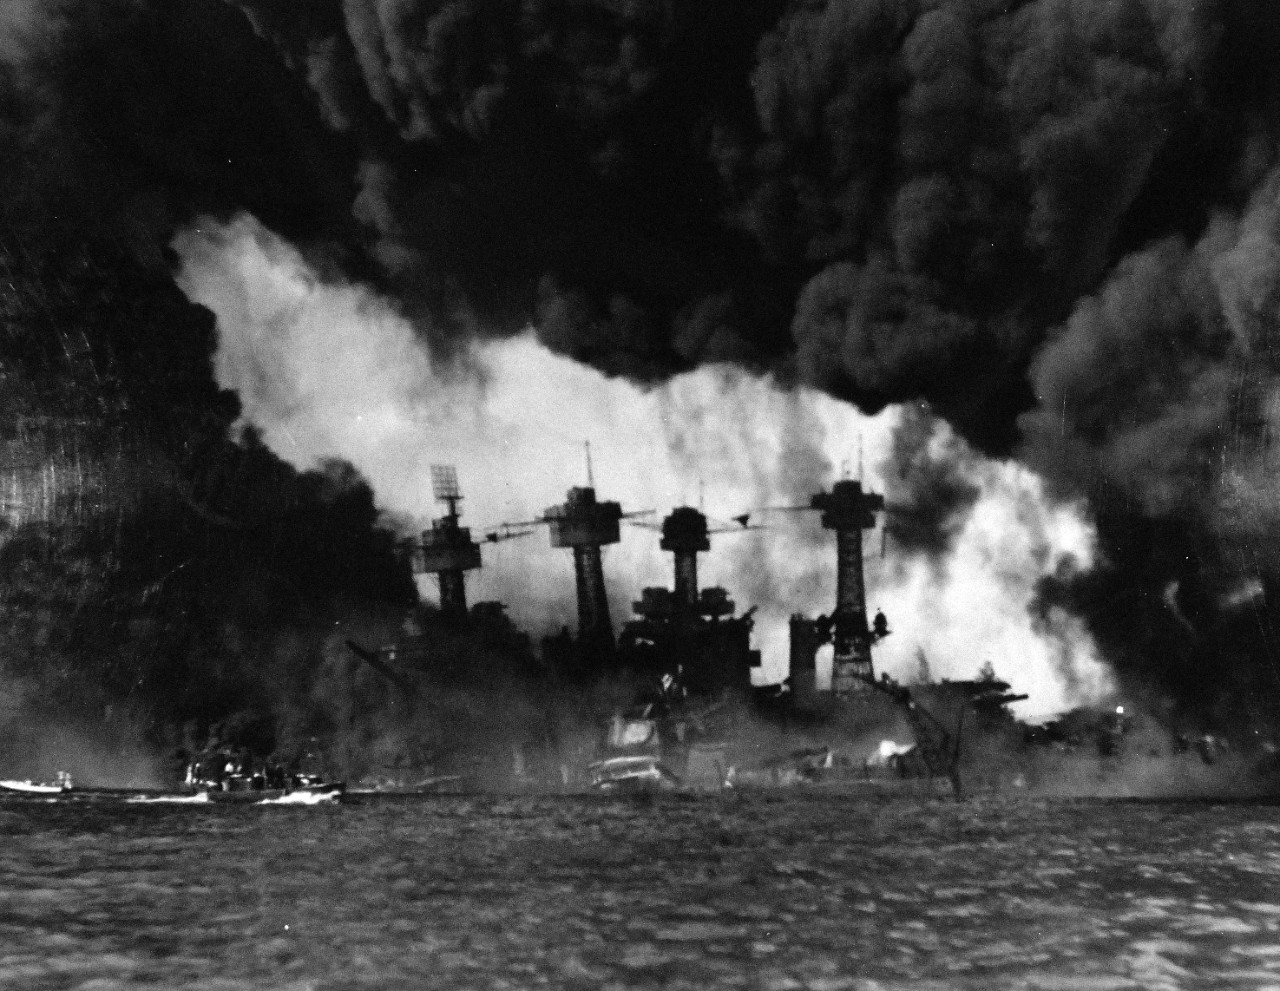 80-G-32725:  Japanese Attack on Pearl Harbor, December 7, 1941.  USS West Virginia (BB 48) and USS Tennessee (BB 43) are shown after the attack.  Official U.S. Navy photograph, now in the collections of the National Archives.   (9/9/2015).